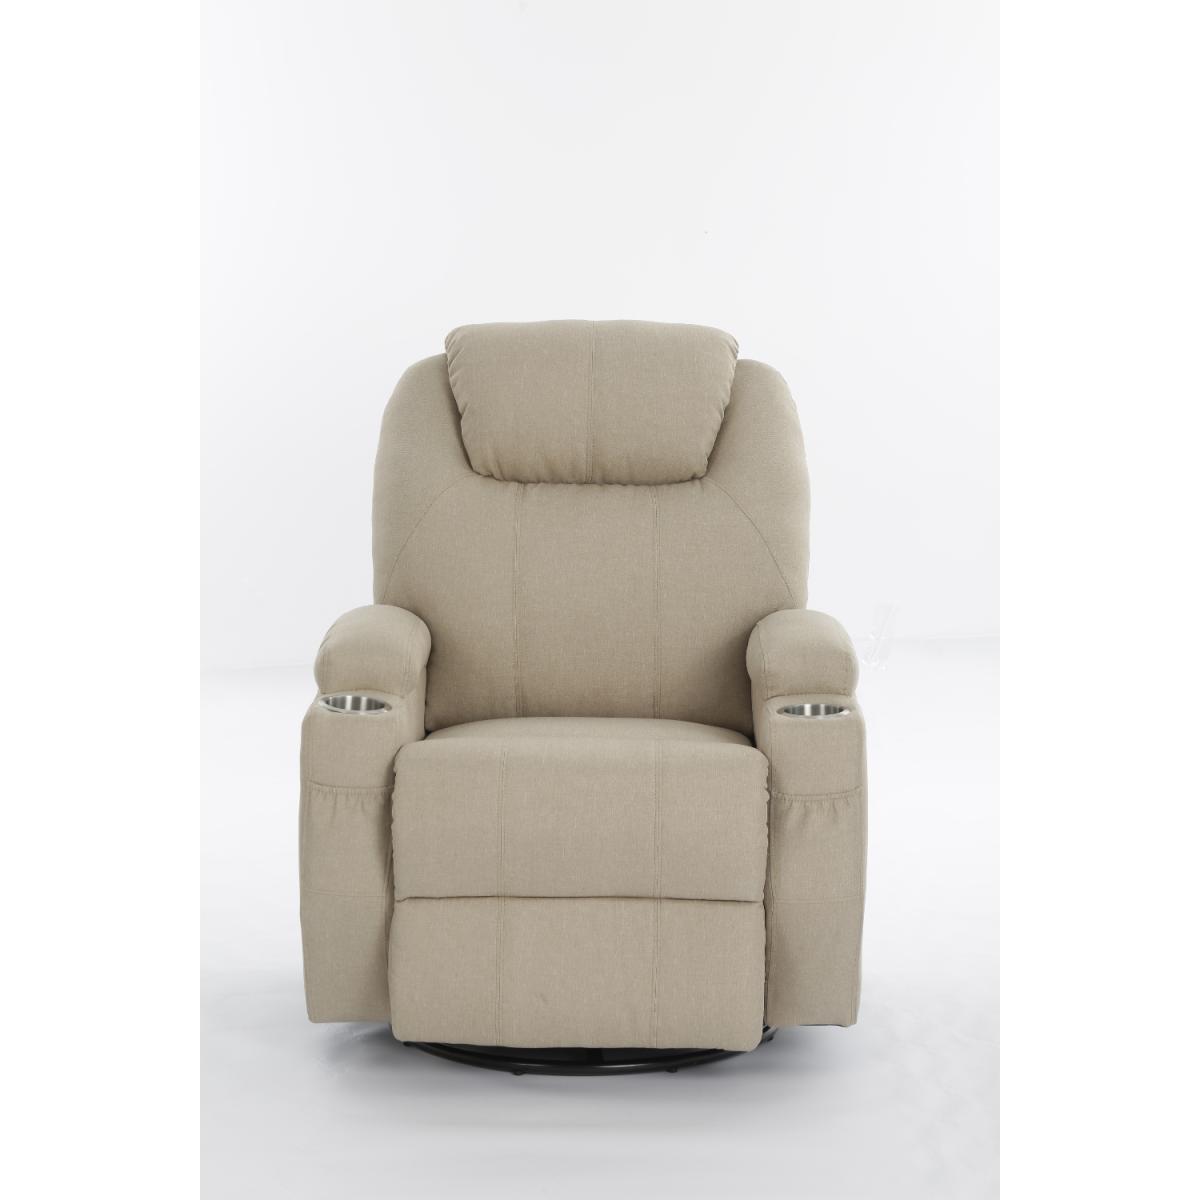 SILLON RECLINABLE/GLIDER BE.